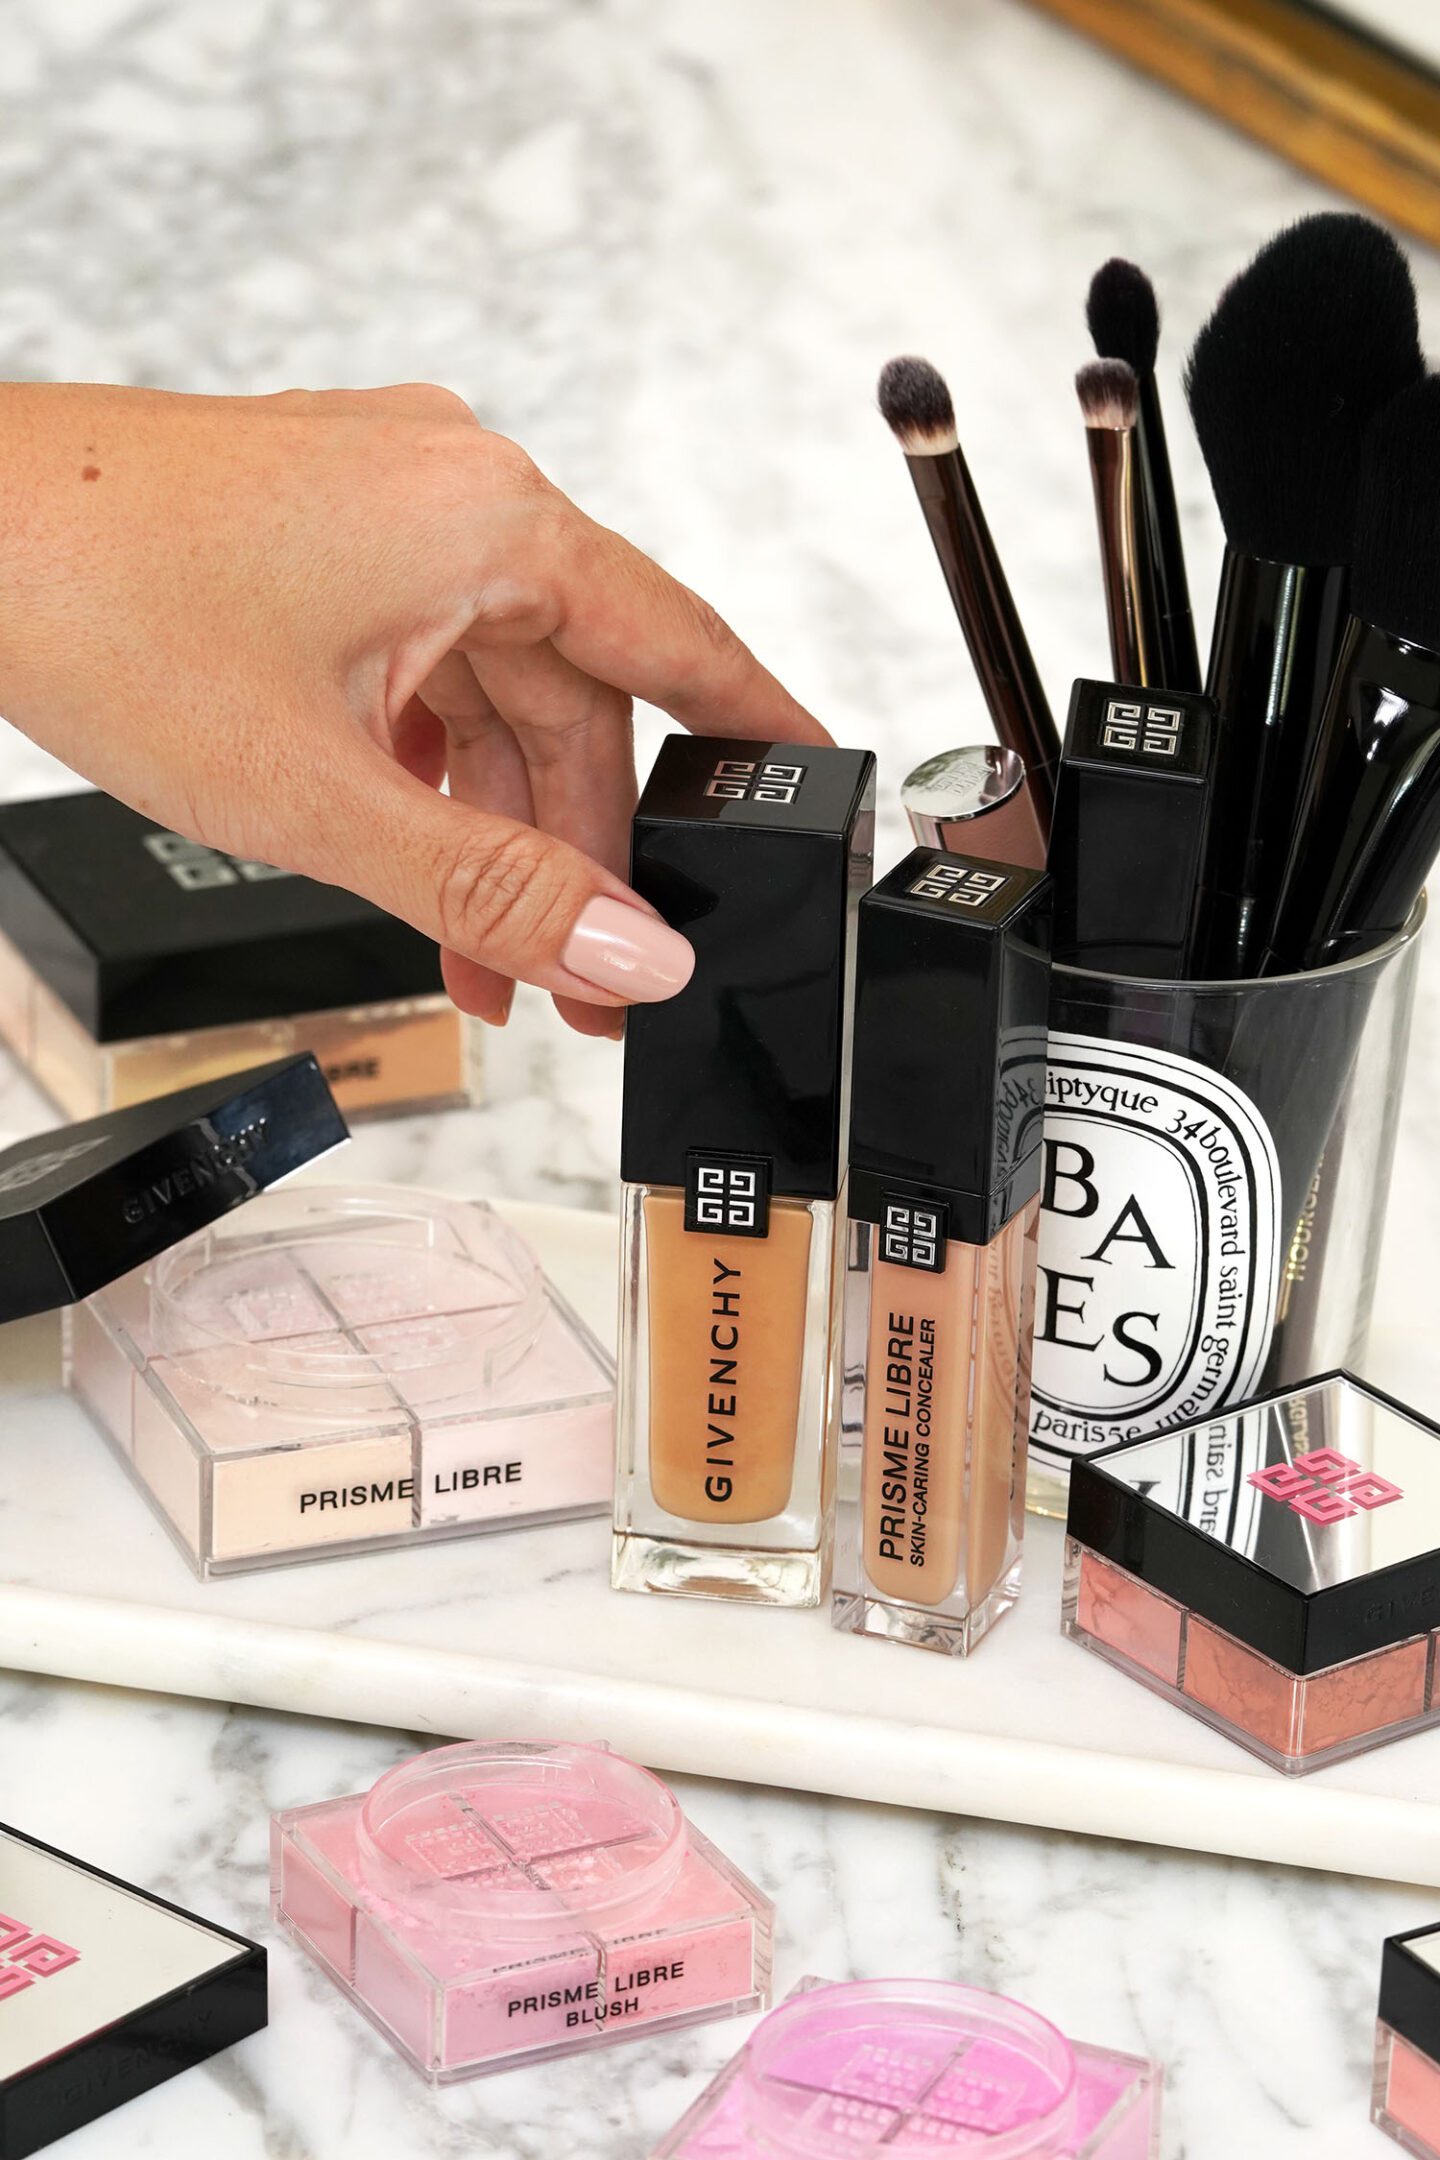 Givenchy Beauty Loves Prisme Libre Foundation, Concealer, Setting Powder and Blush